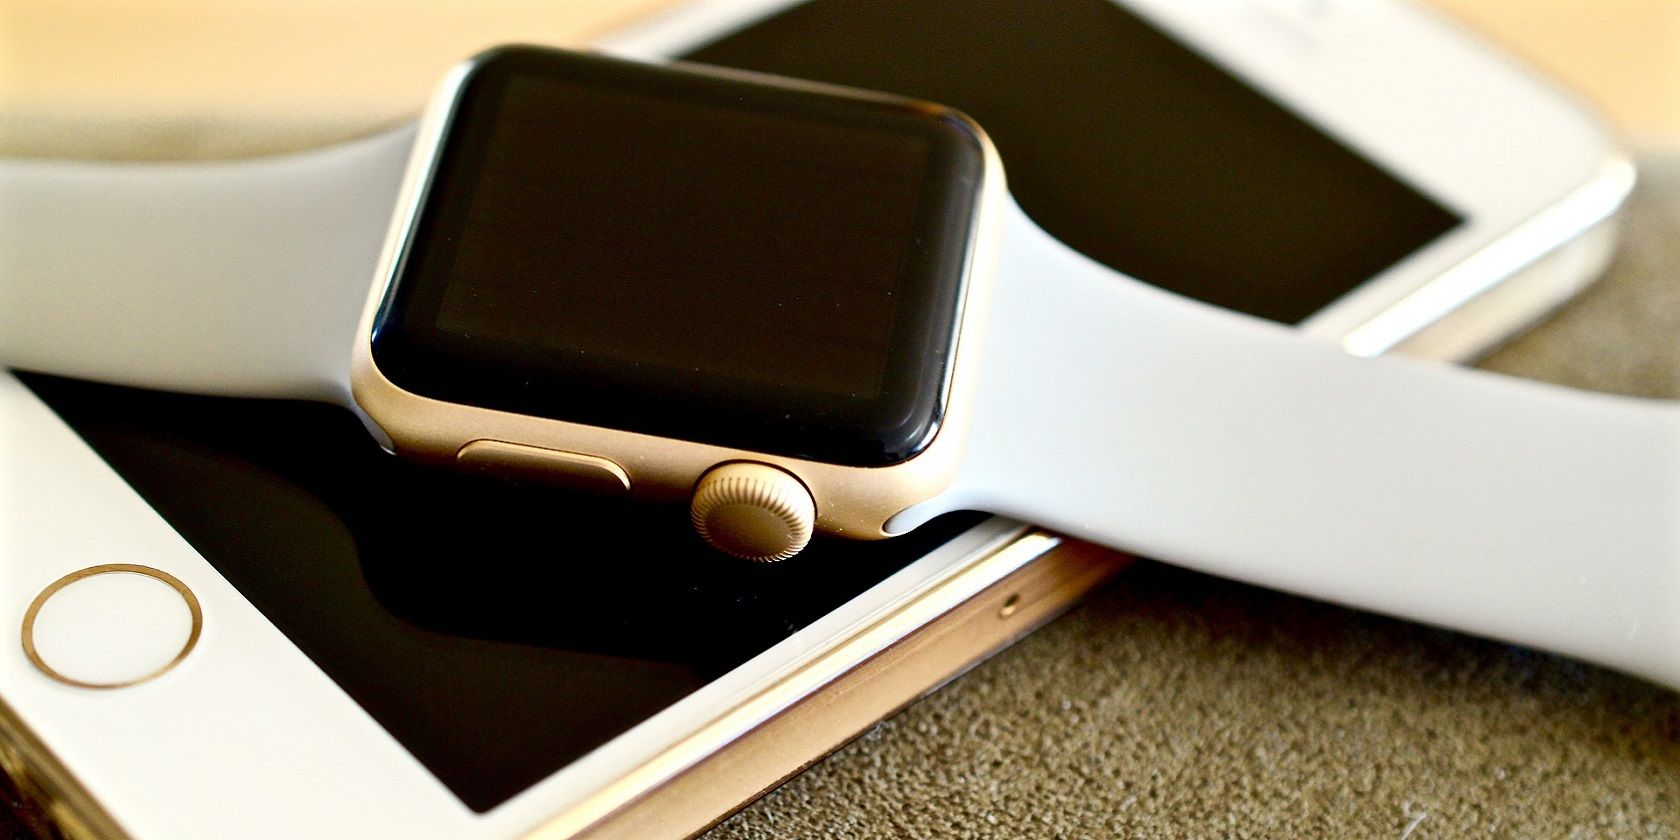 Apple Watch laying atop iPhone